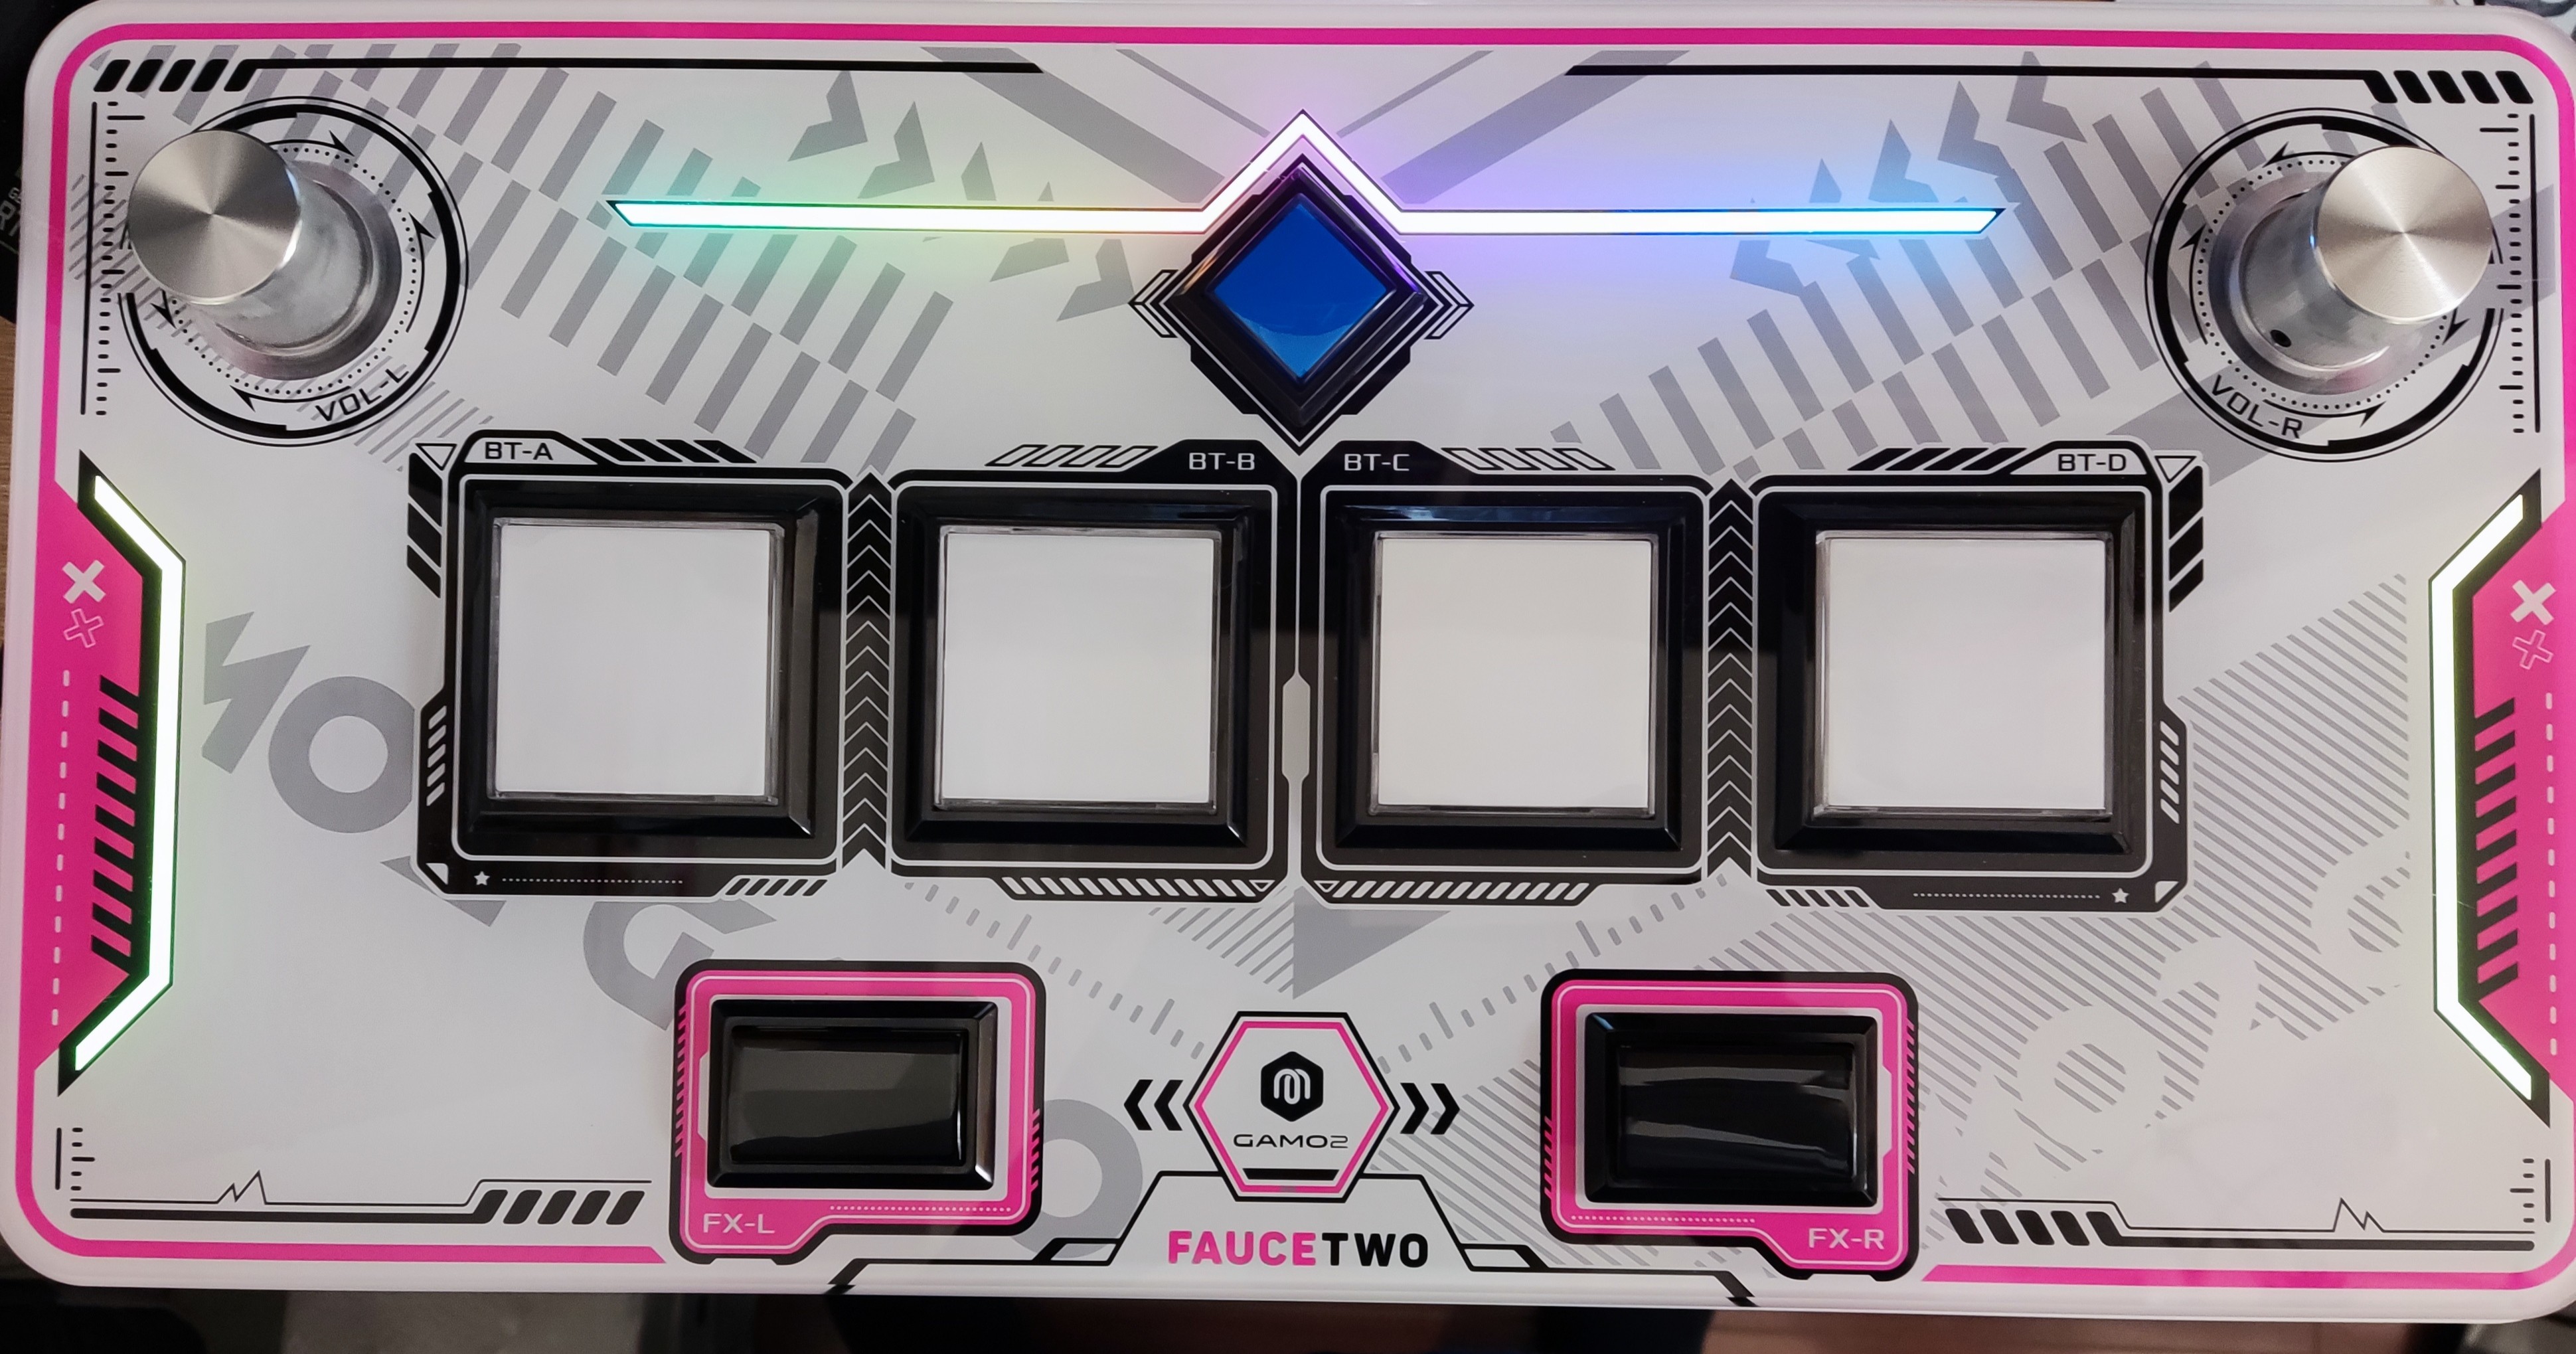 FAUCETWO ボルテコン SOUND VOLTEX コントローラー-